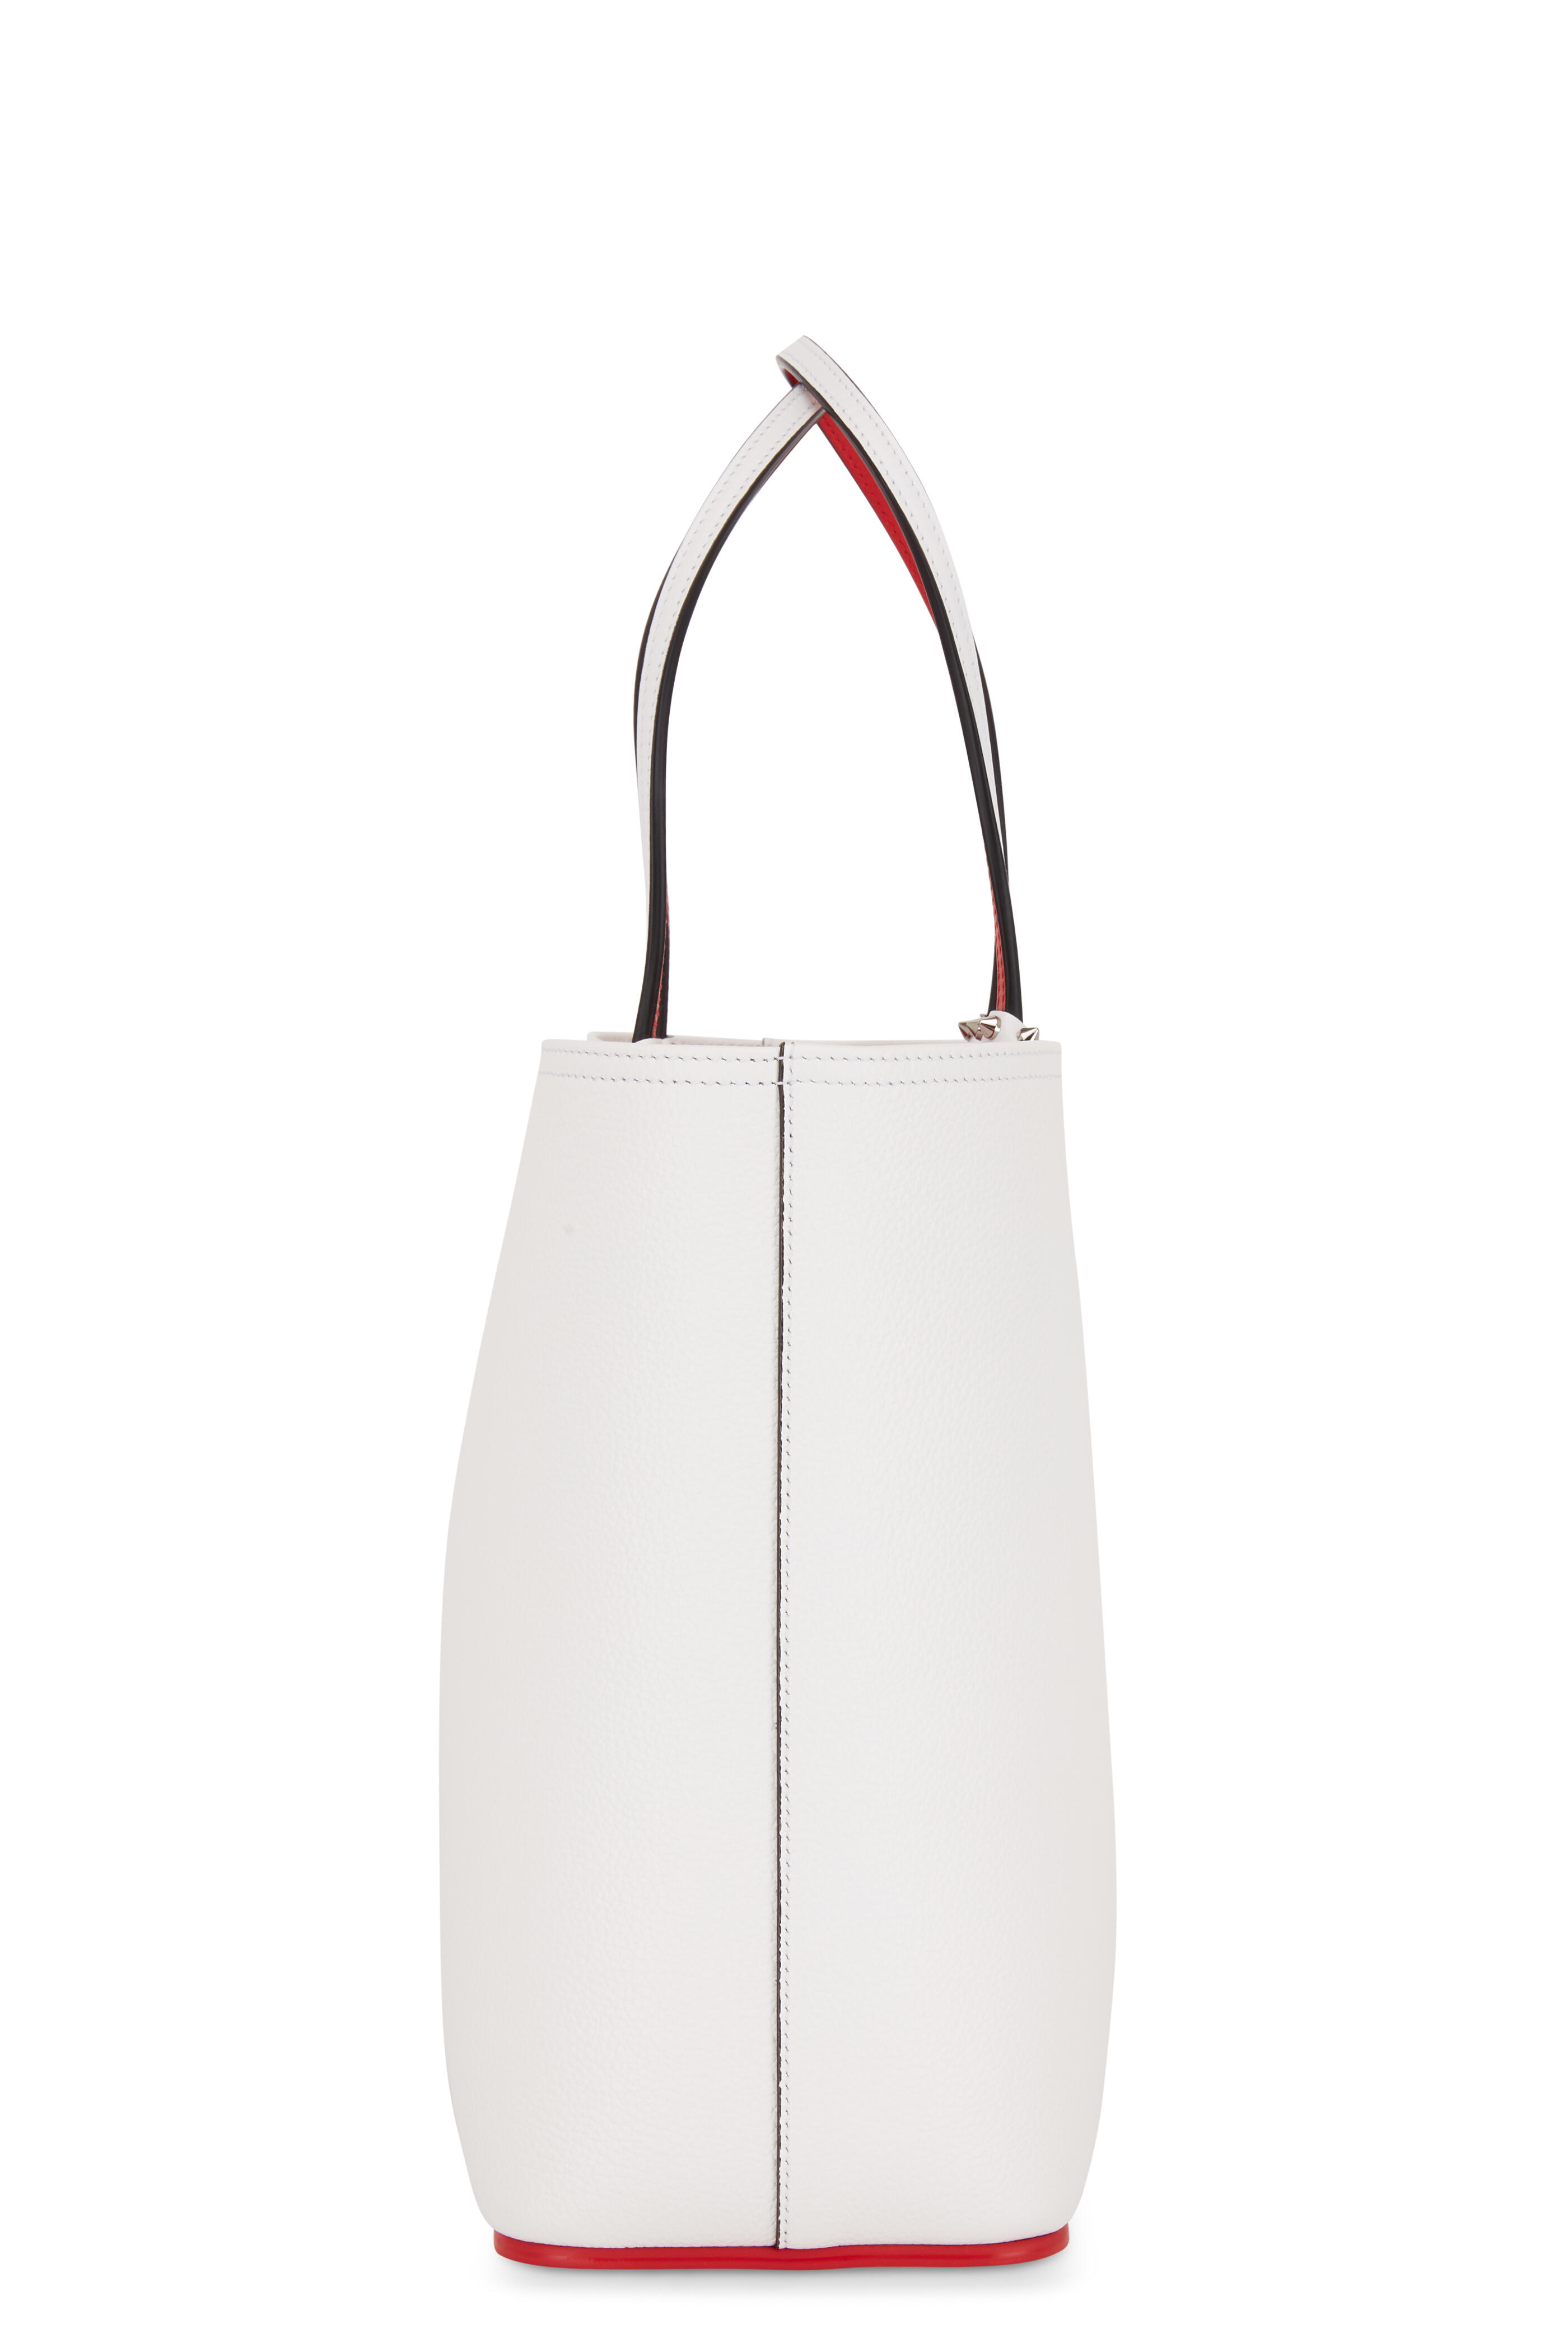 Christian Louboutin Cabata Hand Bag In White Leather in Gray